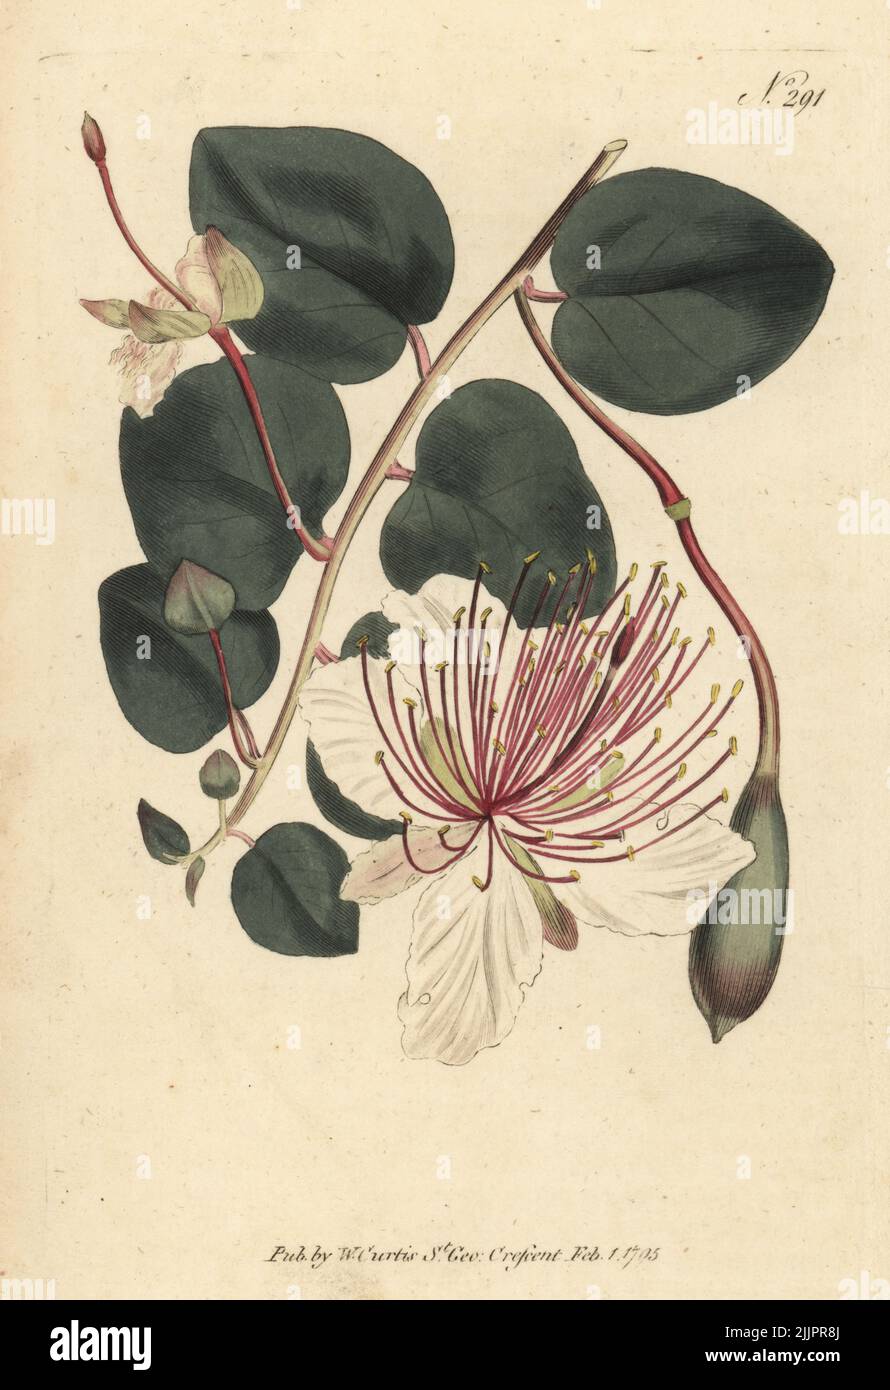 The caper shrub or Flinders rose, Capparis spinosa. Native to southern Europe and the Levant. used as a pickled garnish. Handcoloured copperplate engraving after a botanical illustration from William Curtis's Botanical Magazine, Stephen Couchman, London, 1795. Stock Photo